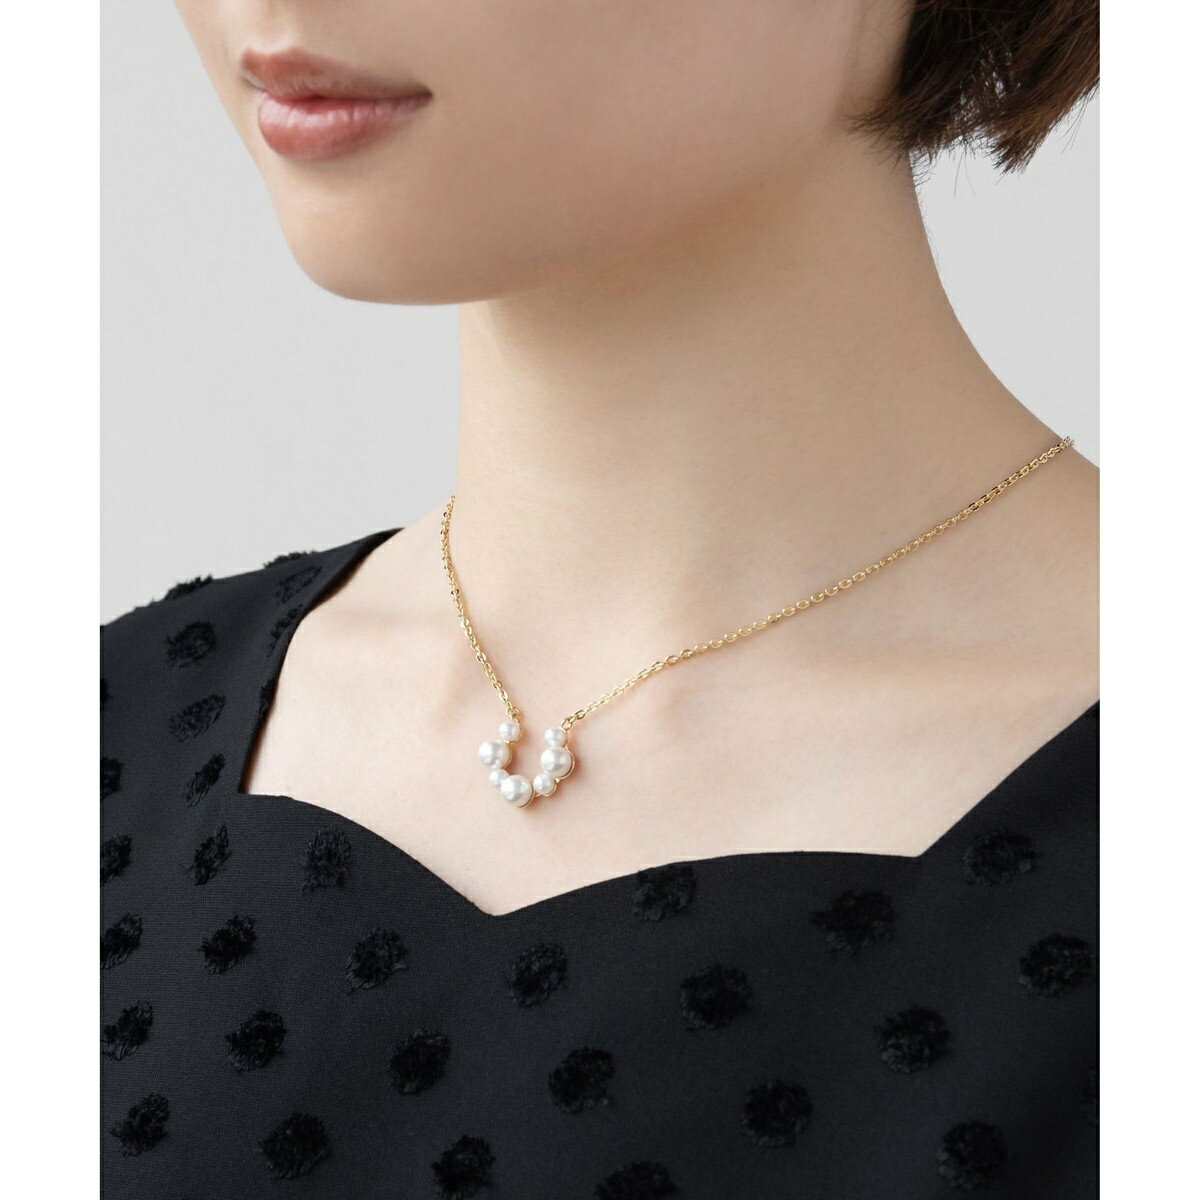 FRILL PEARL HORSE SHOE NECKLACE lbNX^gbJiTOCCAj